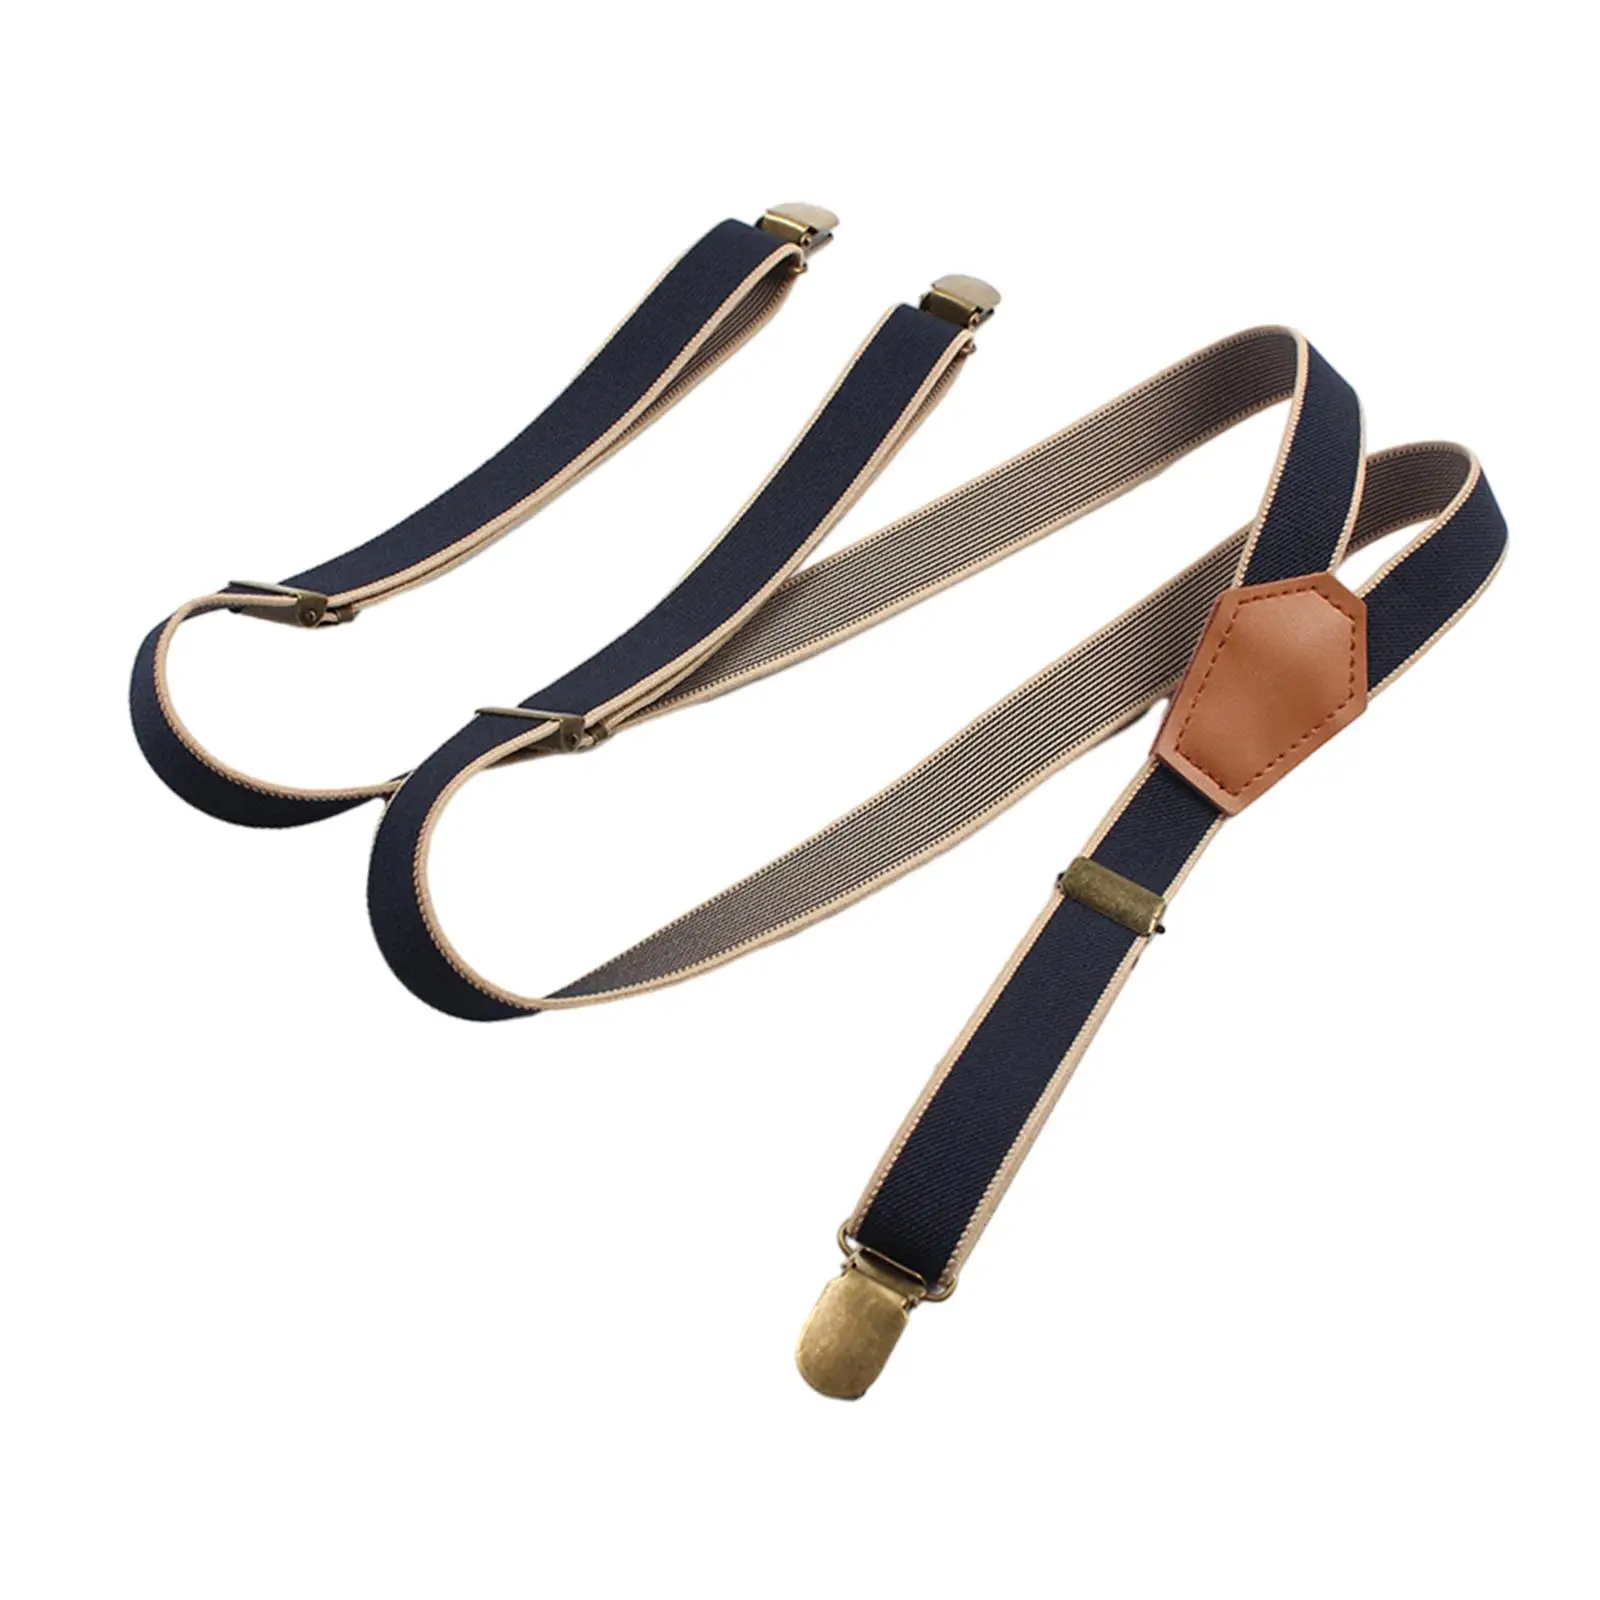 Suspenders for Men Trousers Braces 2cm Wide Heavy Duty Elastic Straps with 3 Hook Clips for Business Father/husband`s Gift